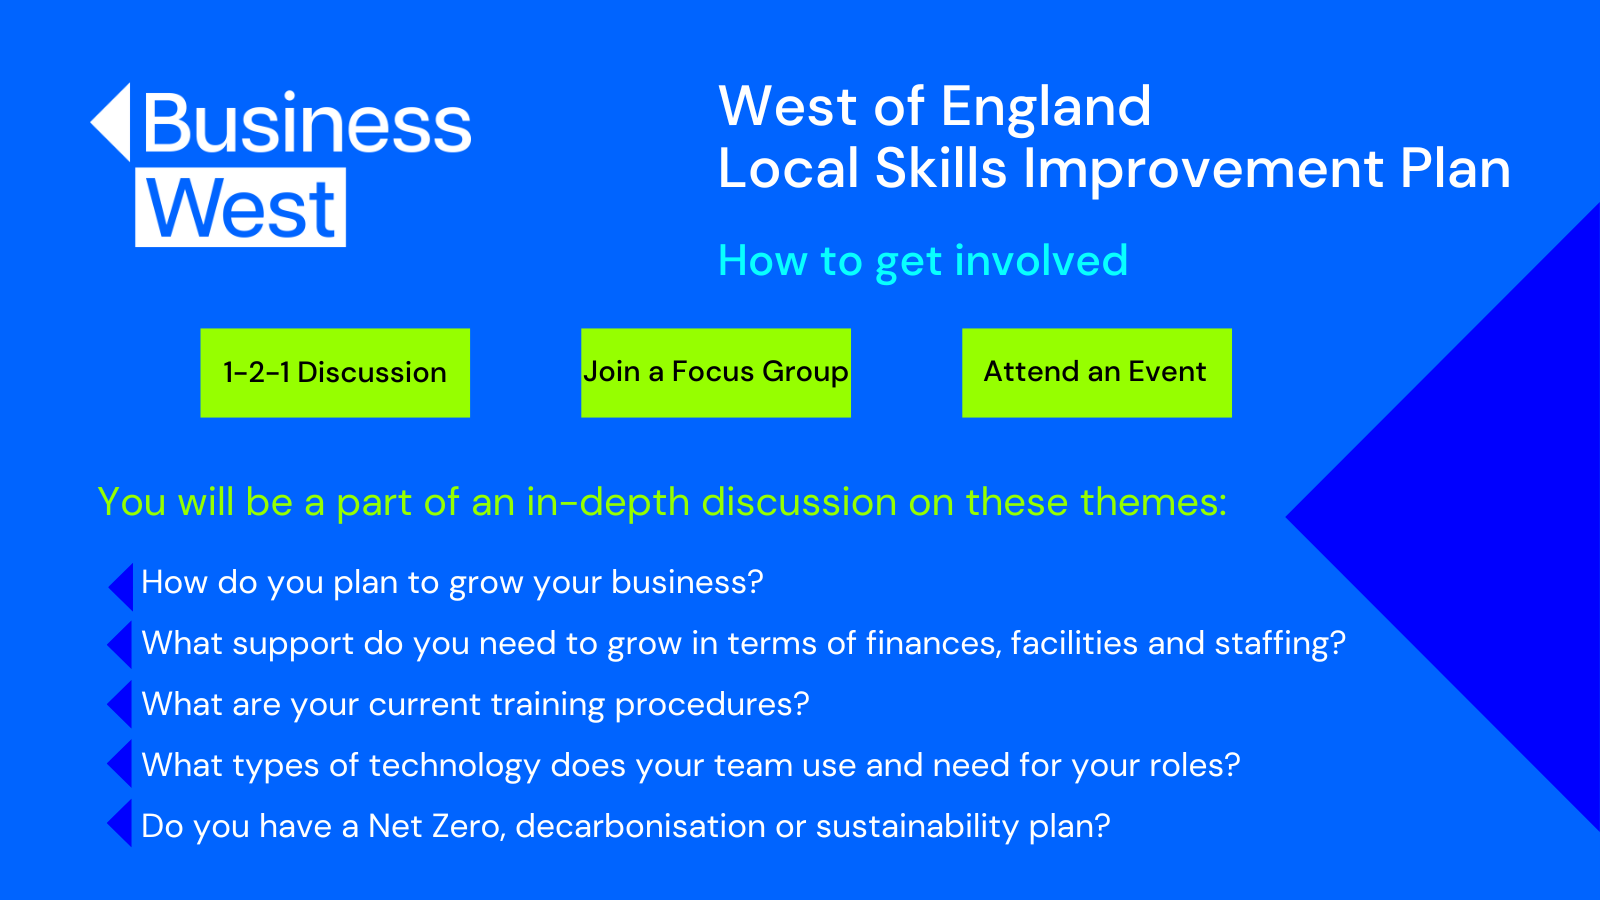 How to get involvved with the West of England LSIP